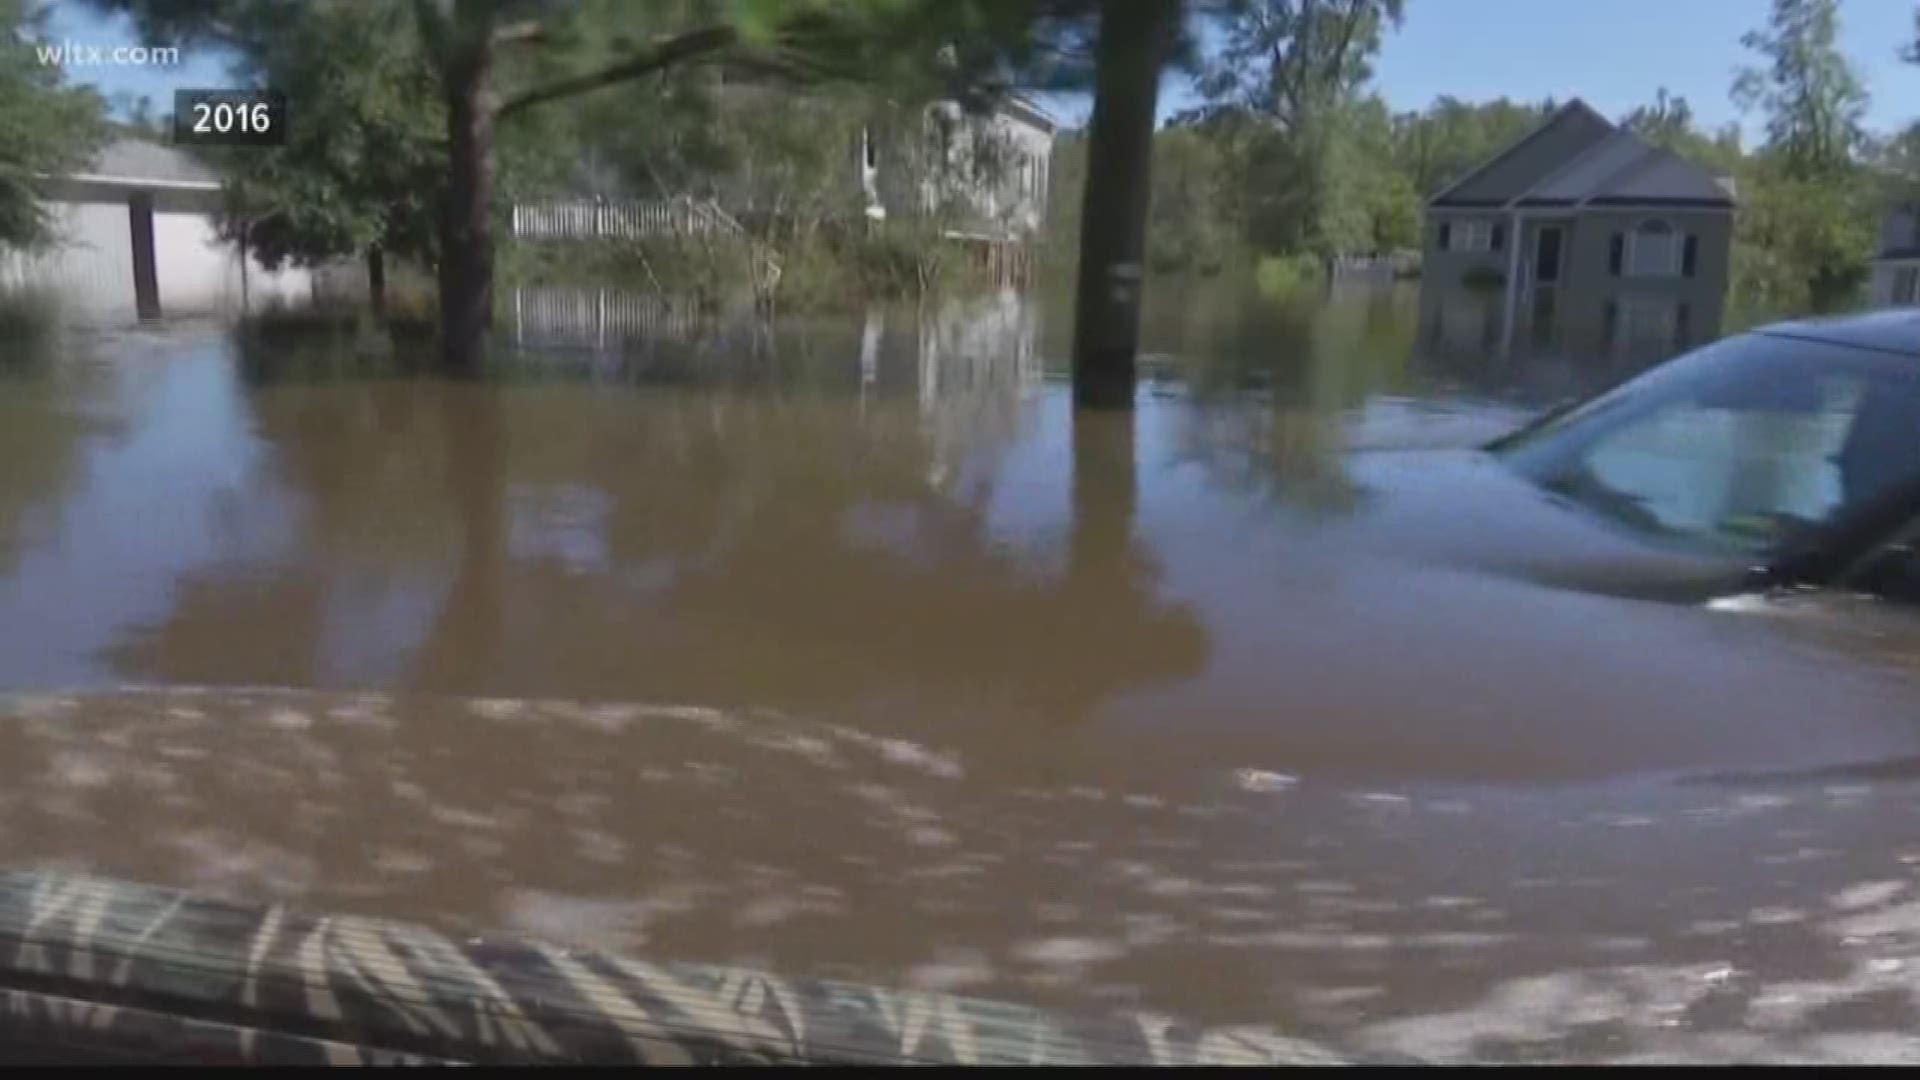 Severe flooding continues from Florence in the Pee Dee region